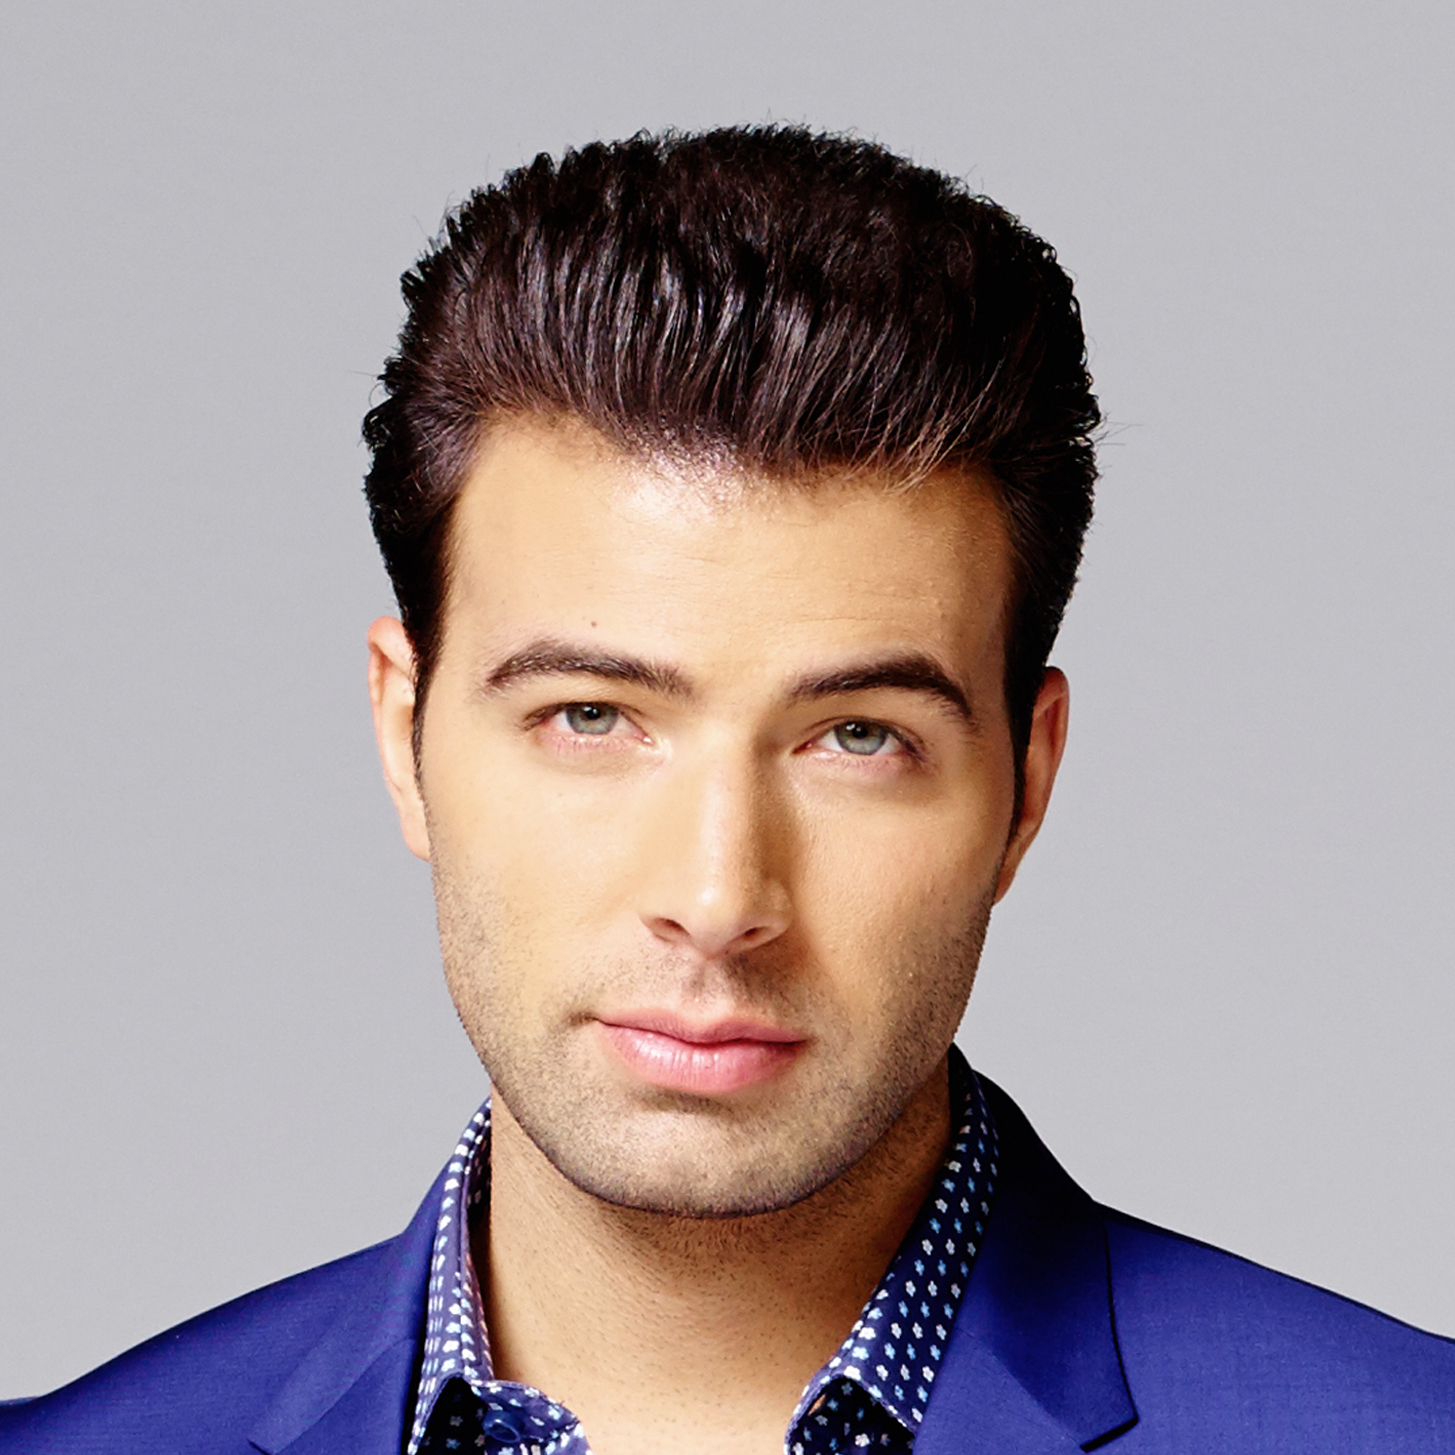 Jencarlos Canela Wallpaper Top Collections Of Pictures Image